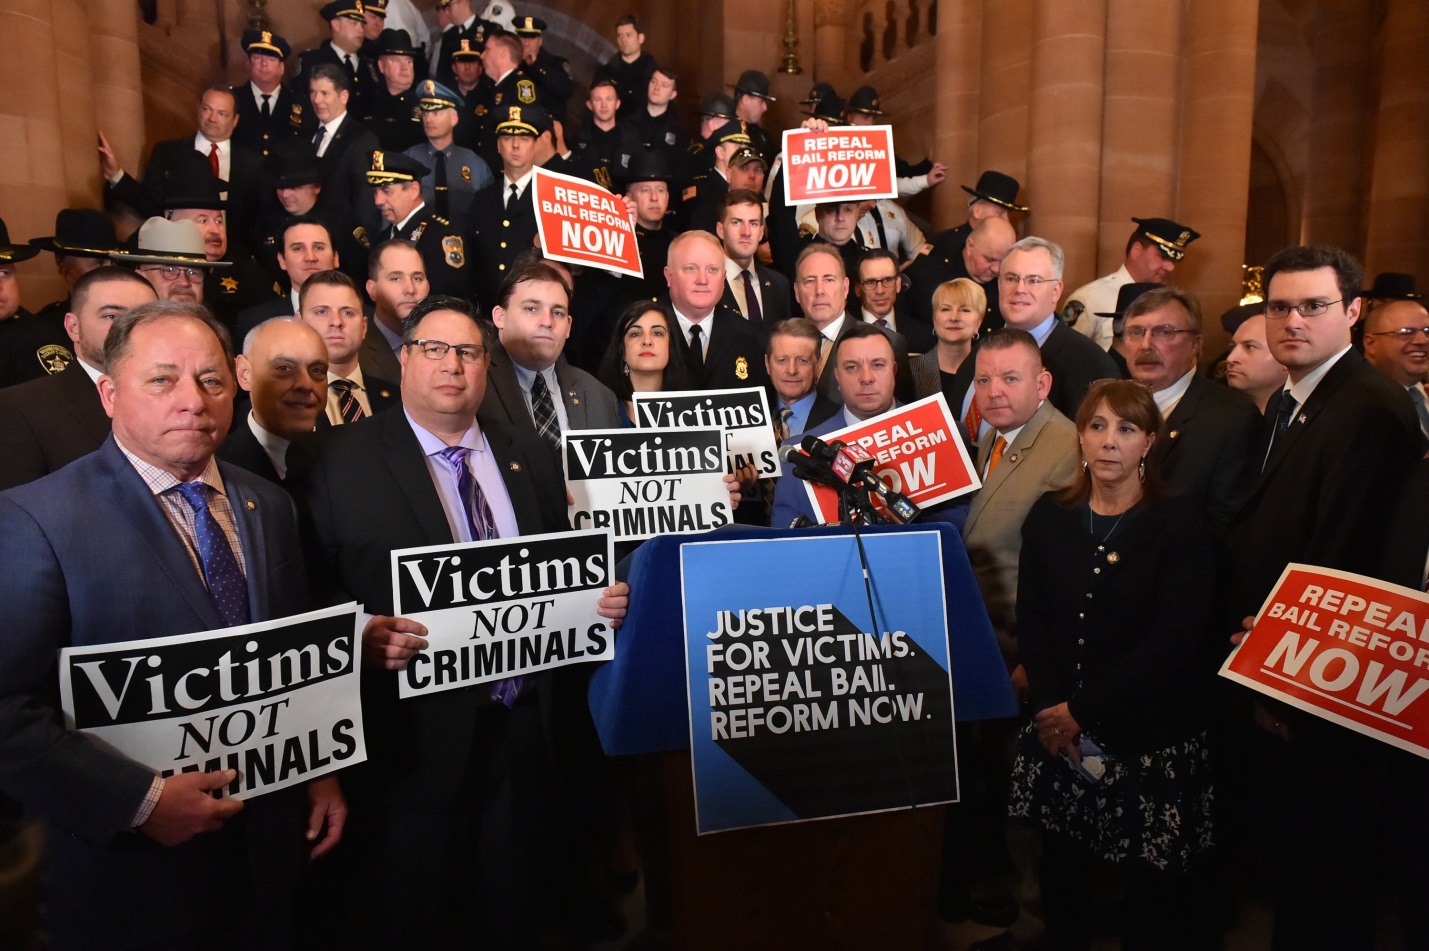 Assemblyman Brian Manktelow (R,C,I,Ref-Lyons) attended a rally to repeal bail reform at the State Capitol on Tuesday, February 4.